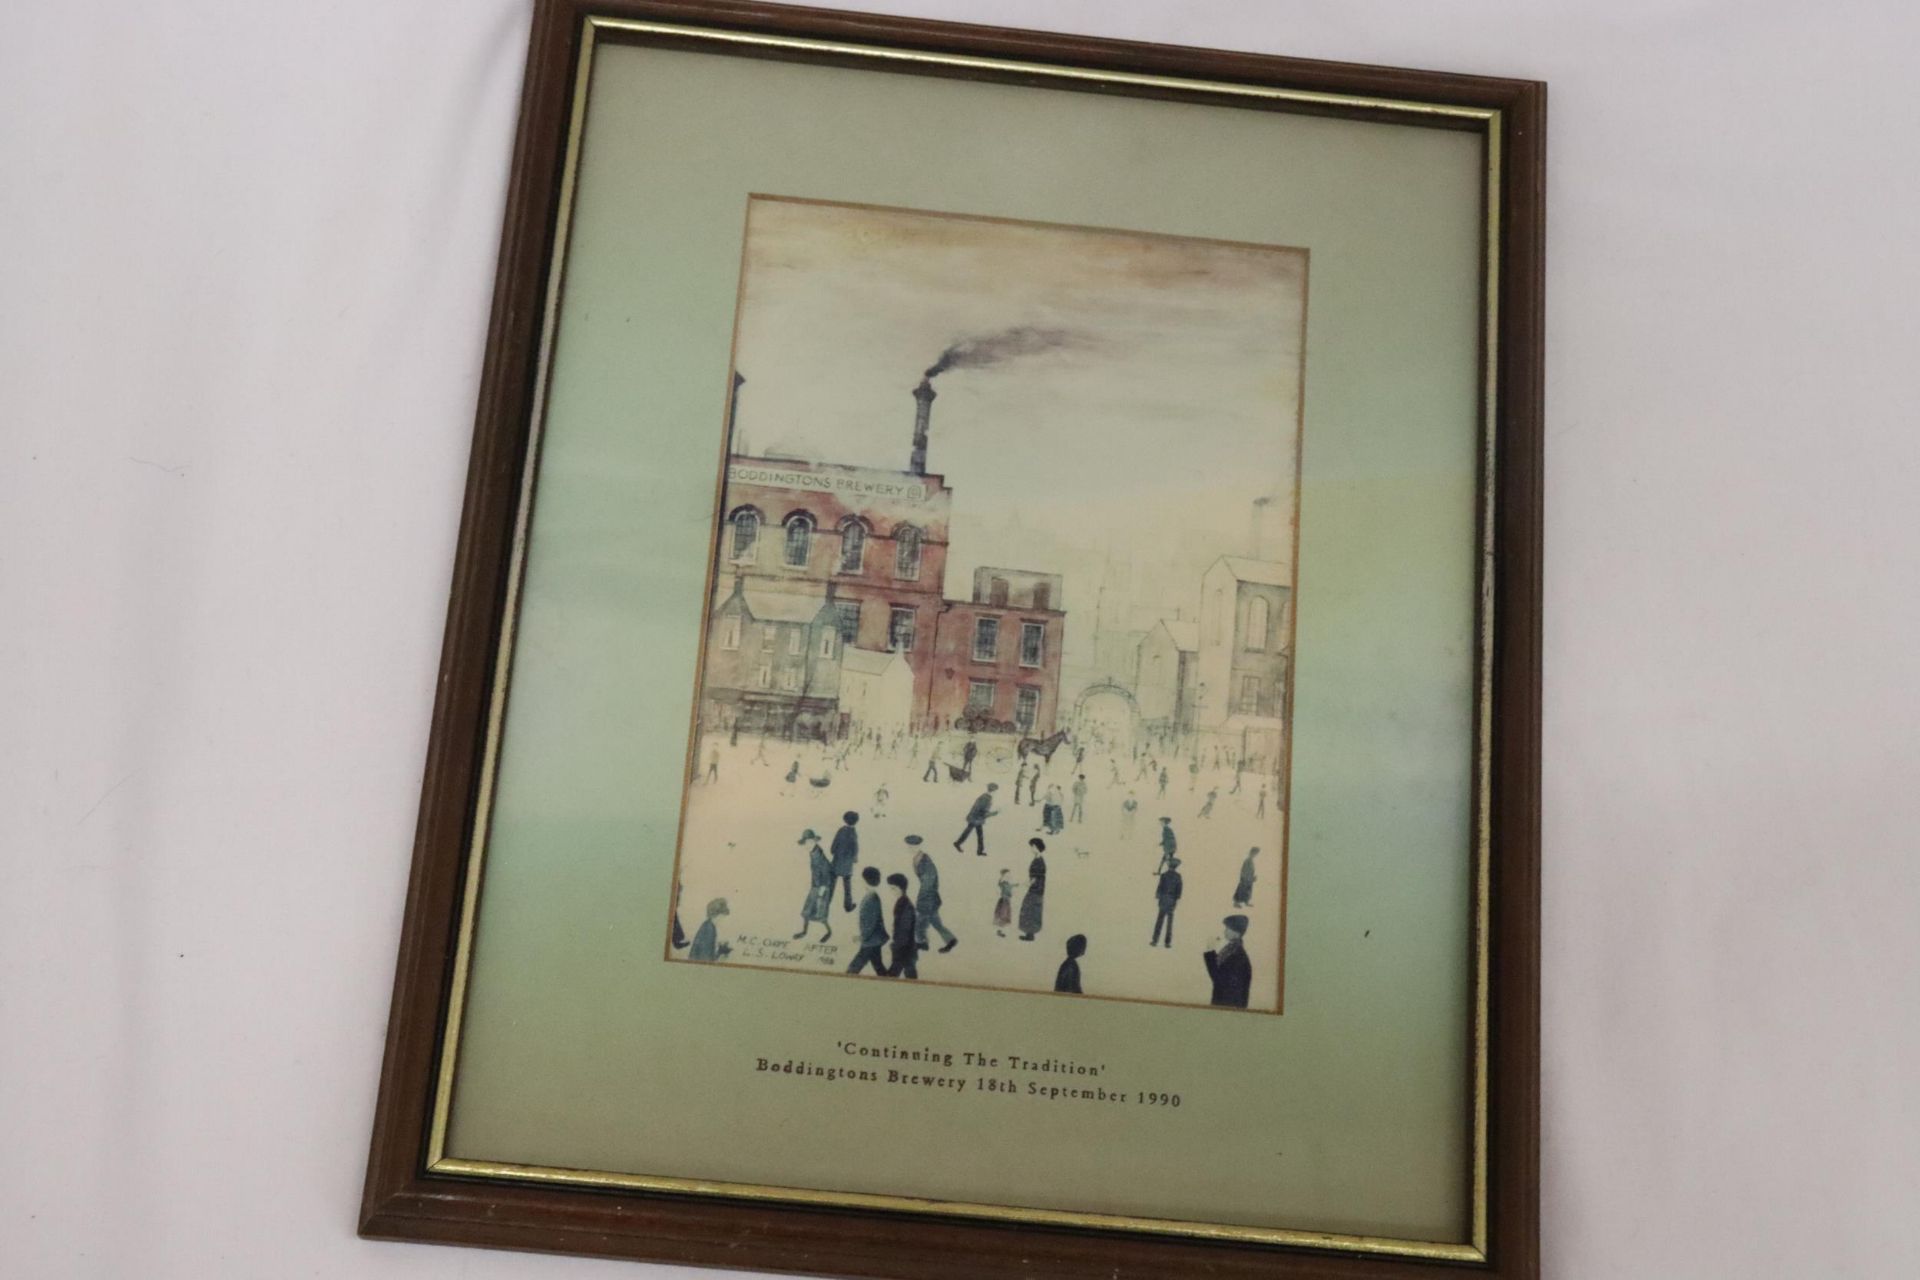 A LOWRY STYLE FRAMED PRINT ENTITLED "CONTINUING THE TRADITION" BODDINGTON BREWERY 18TH SEPTEMBER - Image 2 of 6